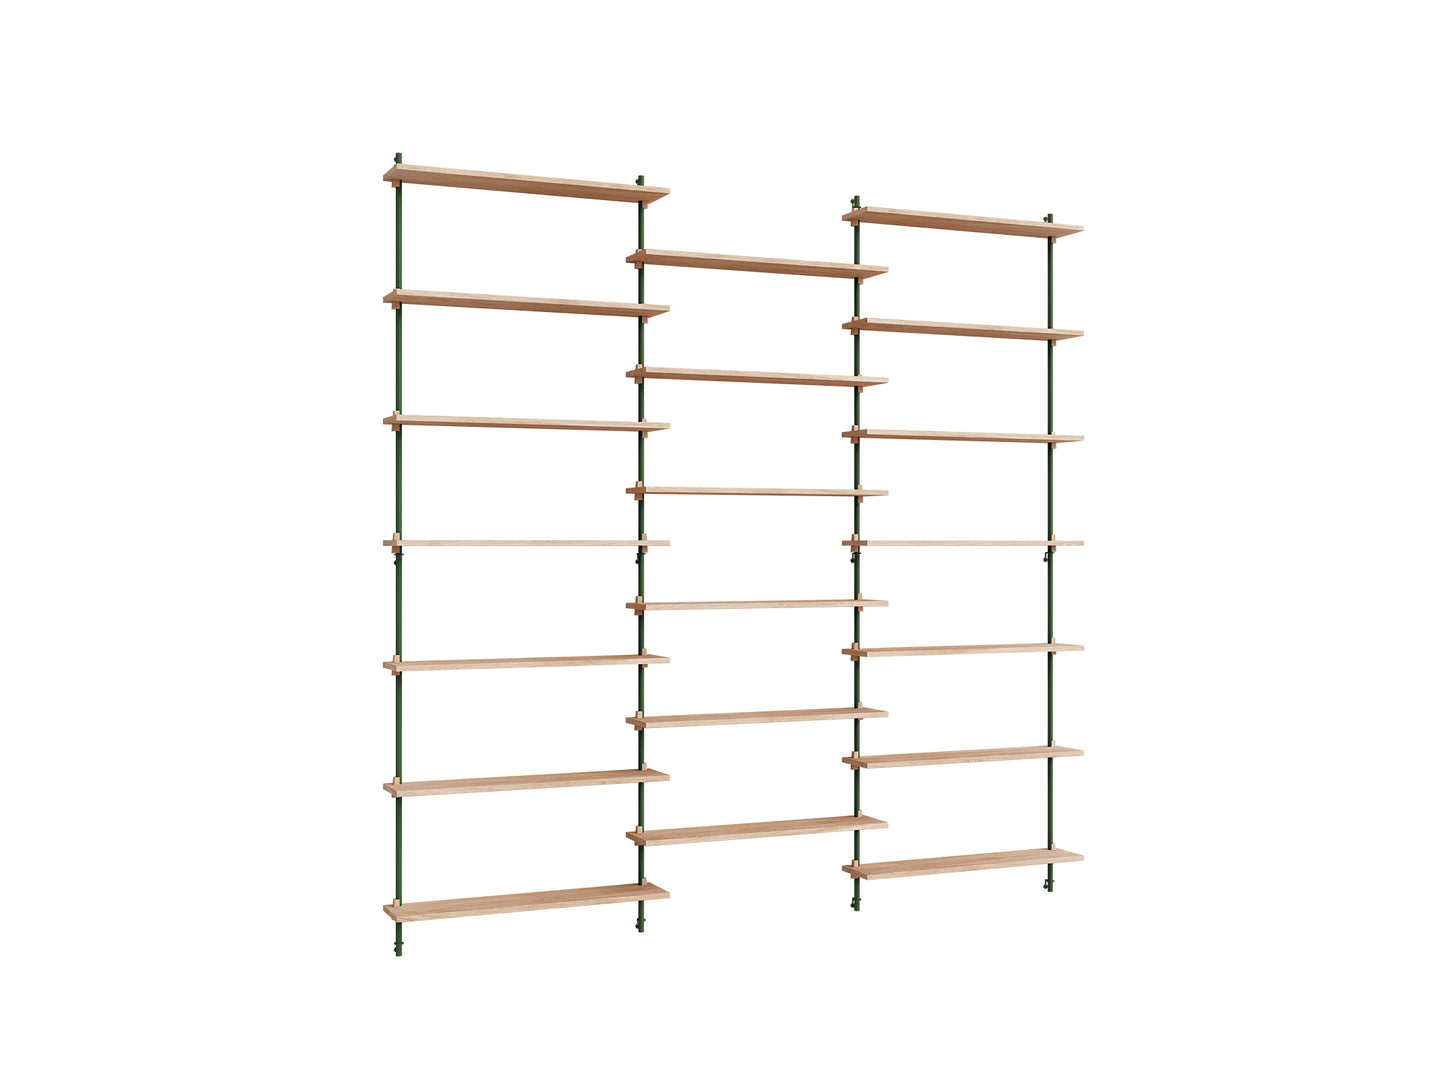 Wall Shelving System Sets (230 cm) by Moebe - WS.230.3 / Pine Green Uprights / Oiled Oak